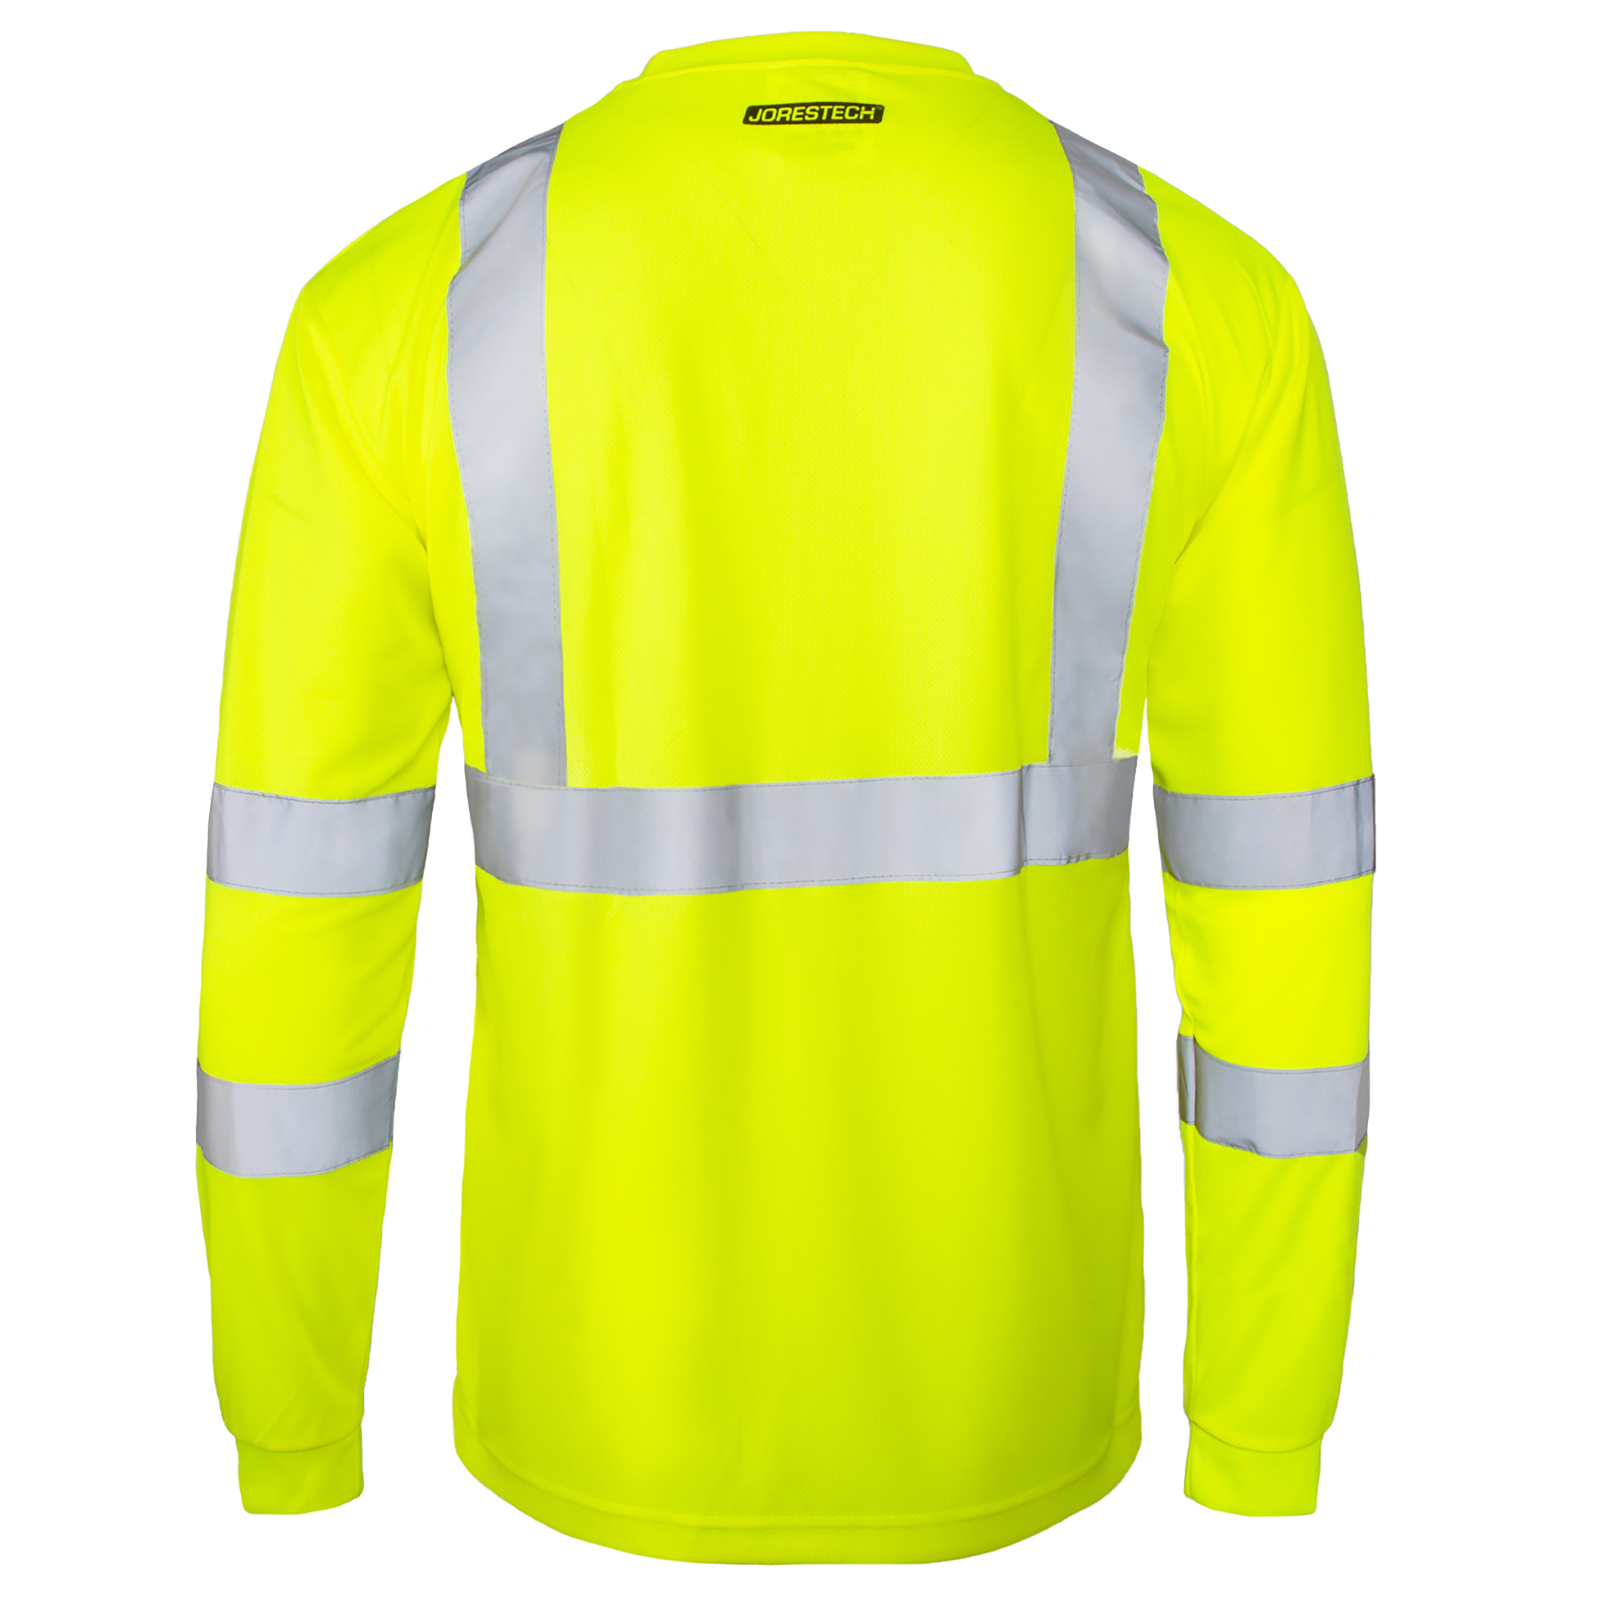 Back view of the yellow hi-vis reflective safety long sleeve shirt